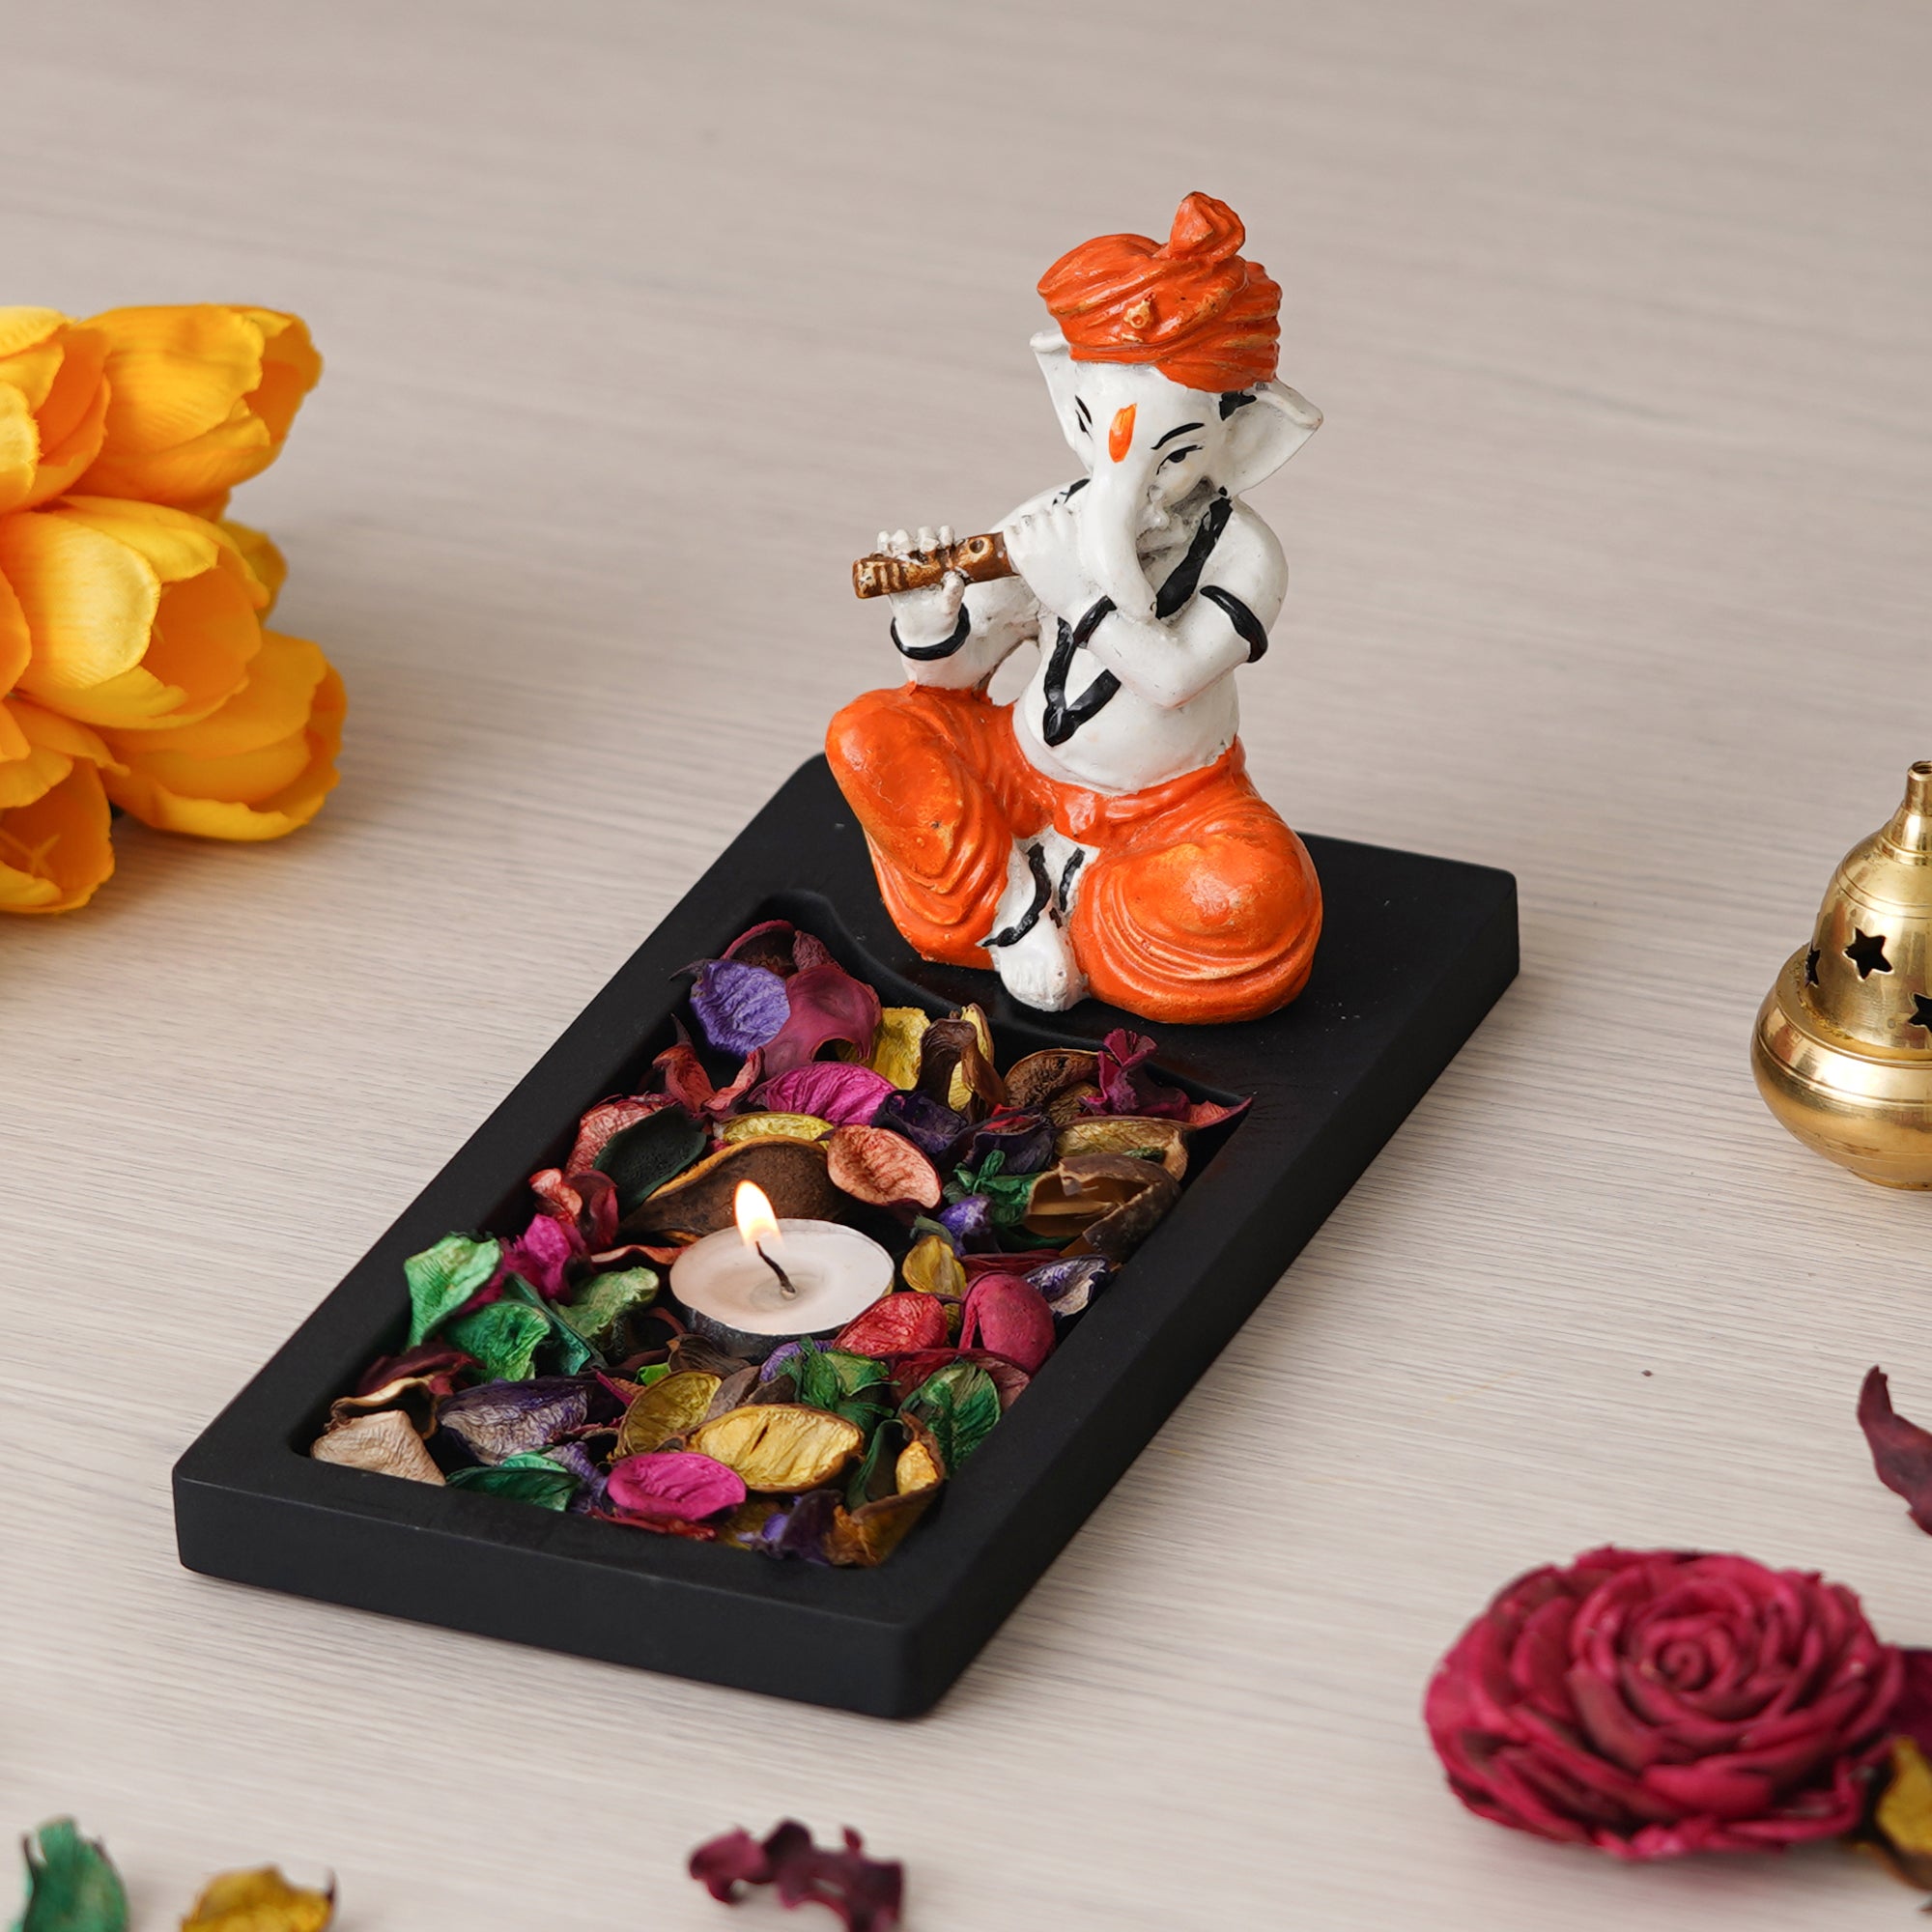 Orange, Brown, White & Black Polyresin Ganesha Playing Flute Showpiece with Rectangle Wooden Base Plate, Fragranced Petals & Tealight 2